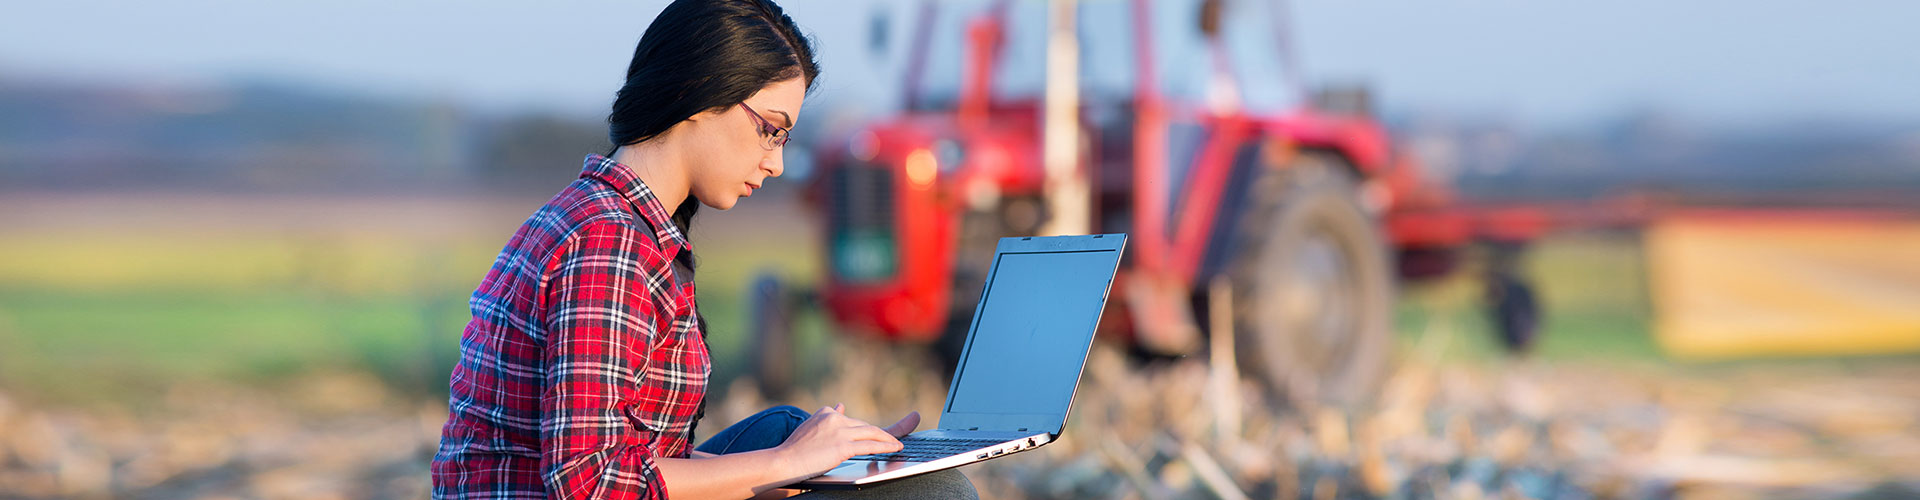 Woman with laptop in Mississippi Delta field